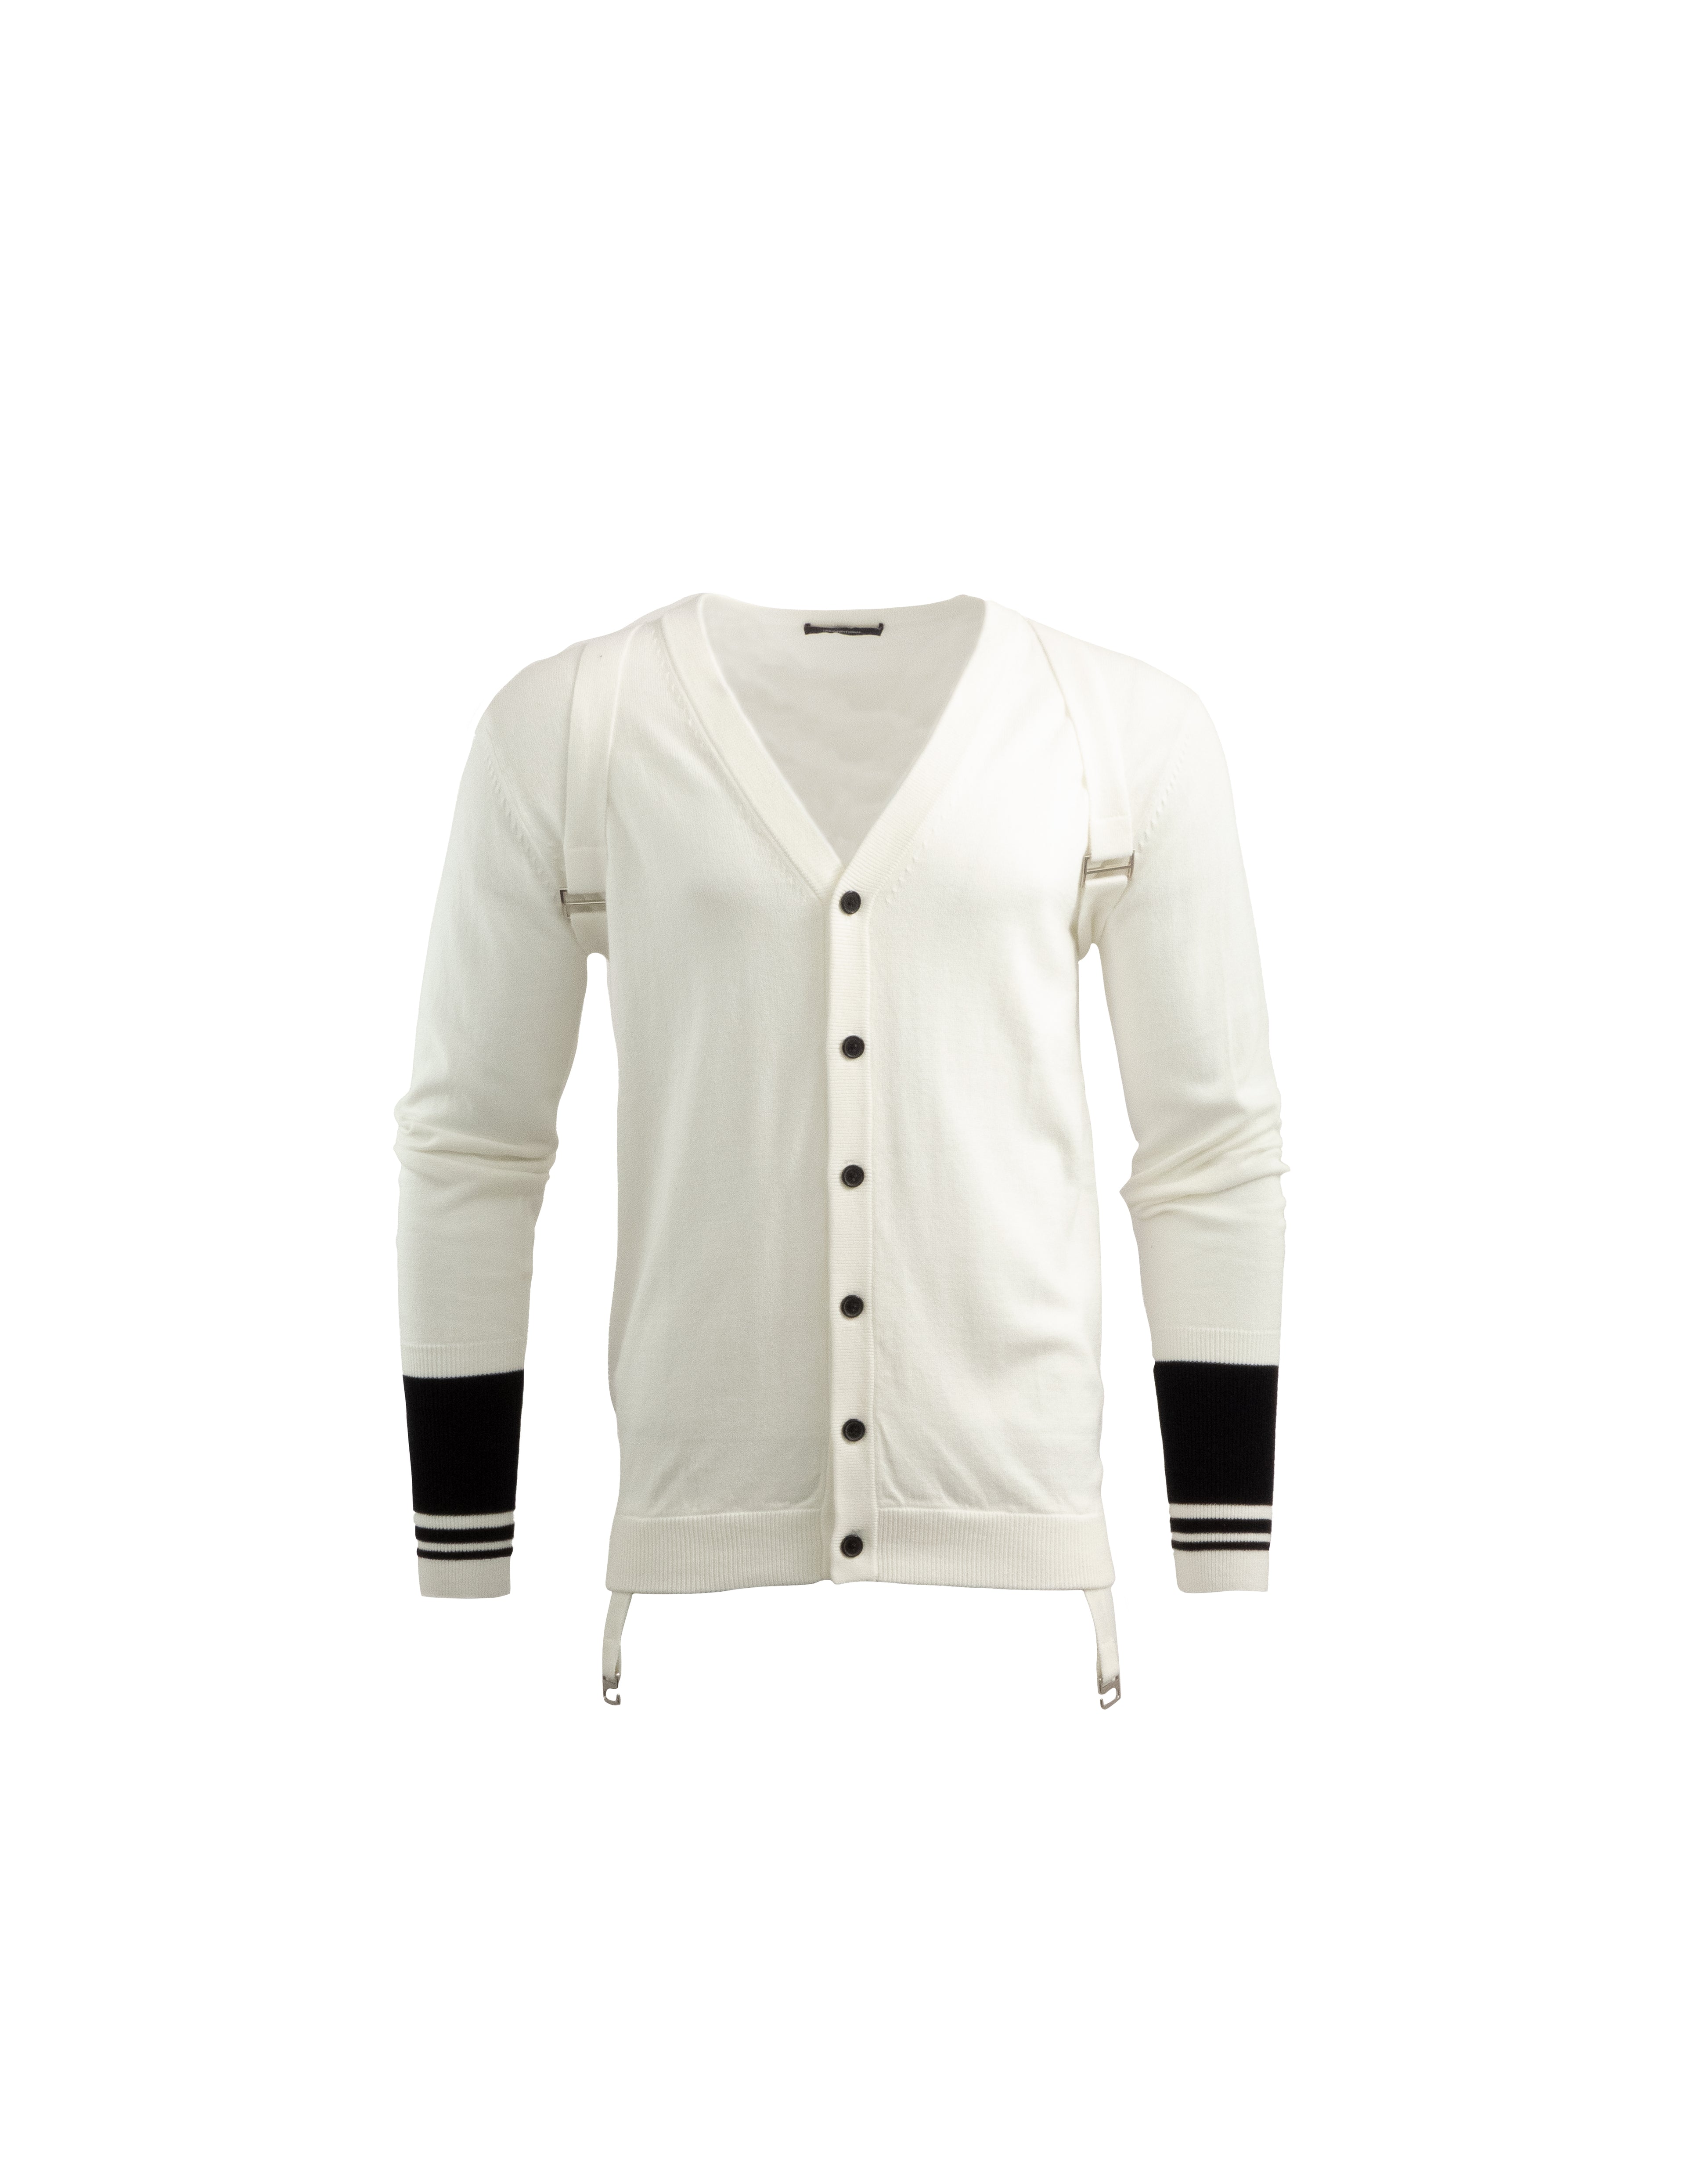 WHITE KNITTED CARDIGAN WITH BLACK STRIPED CUFFS & STRAP DETAILING